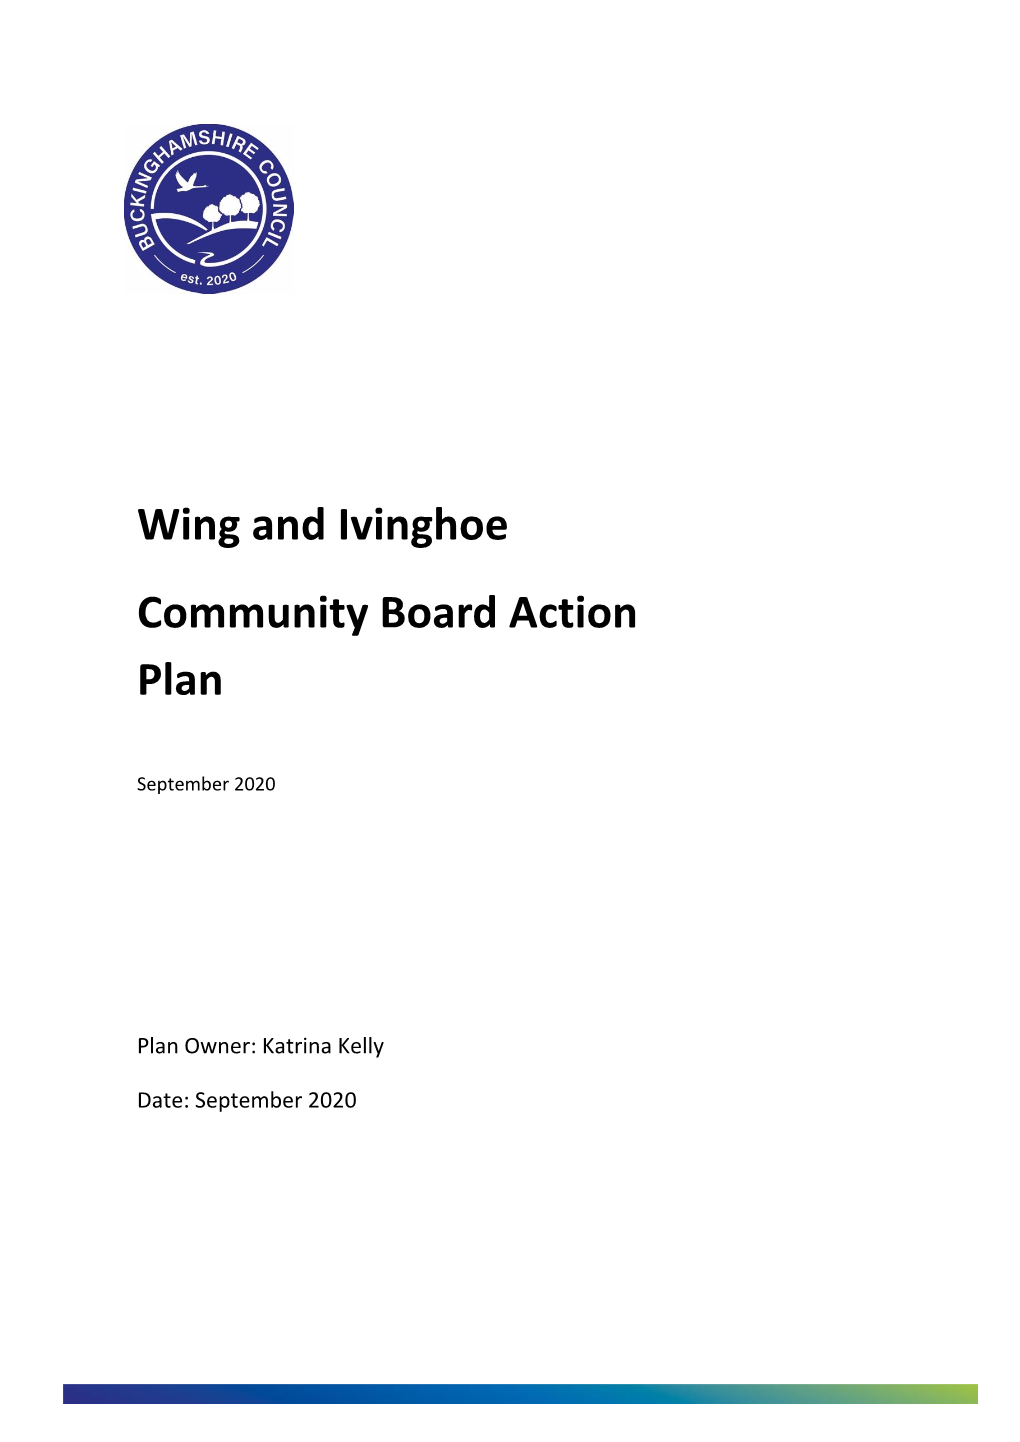 Wing and Ivinghoe Community Board Action Plan